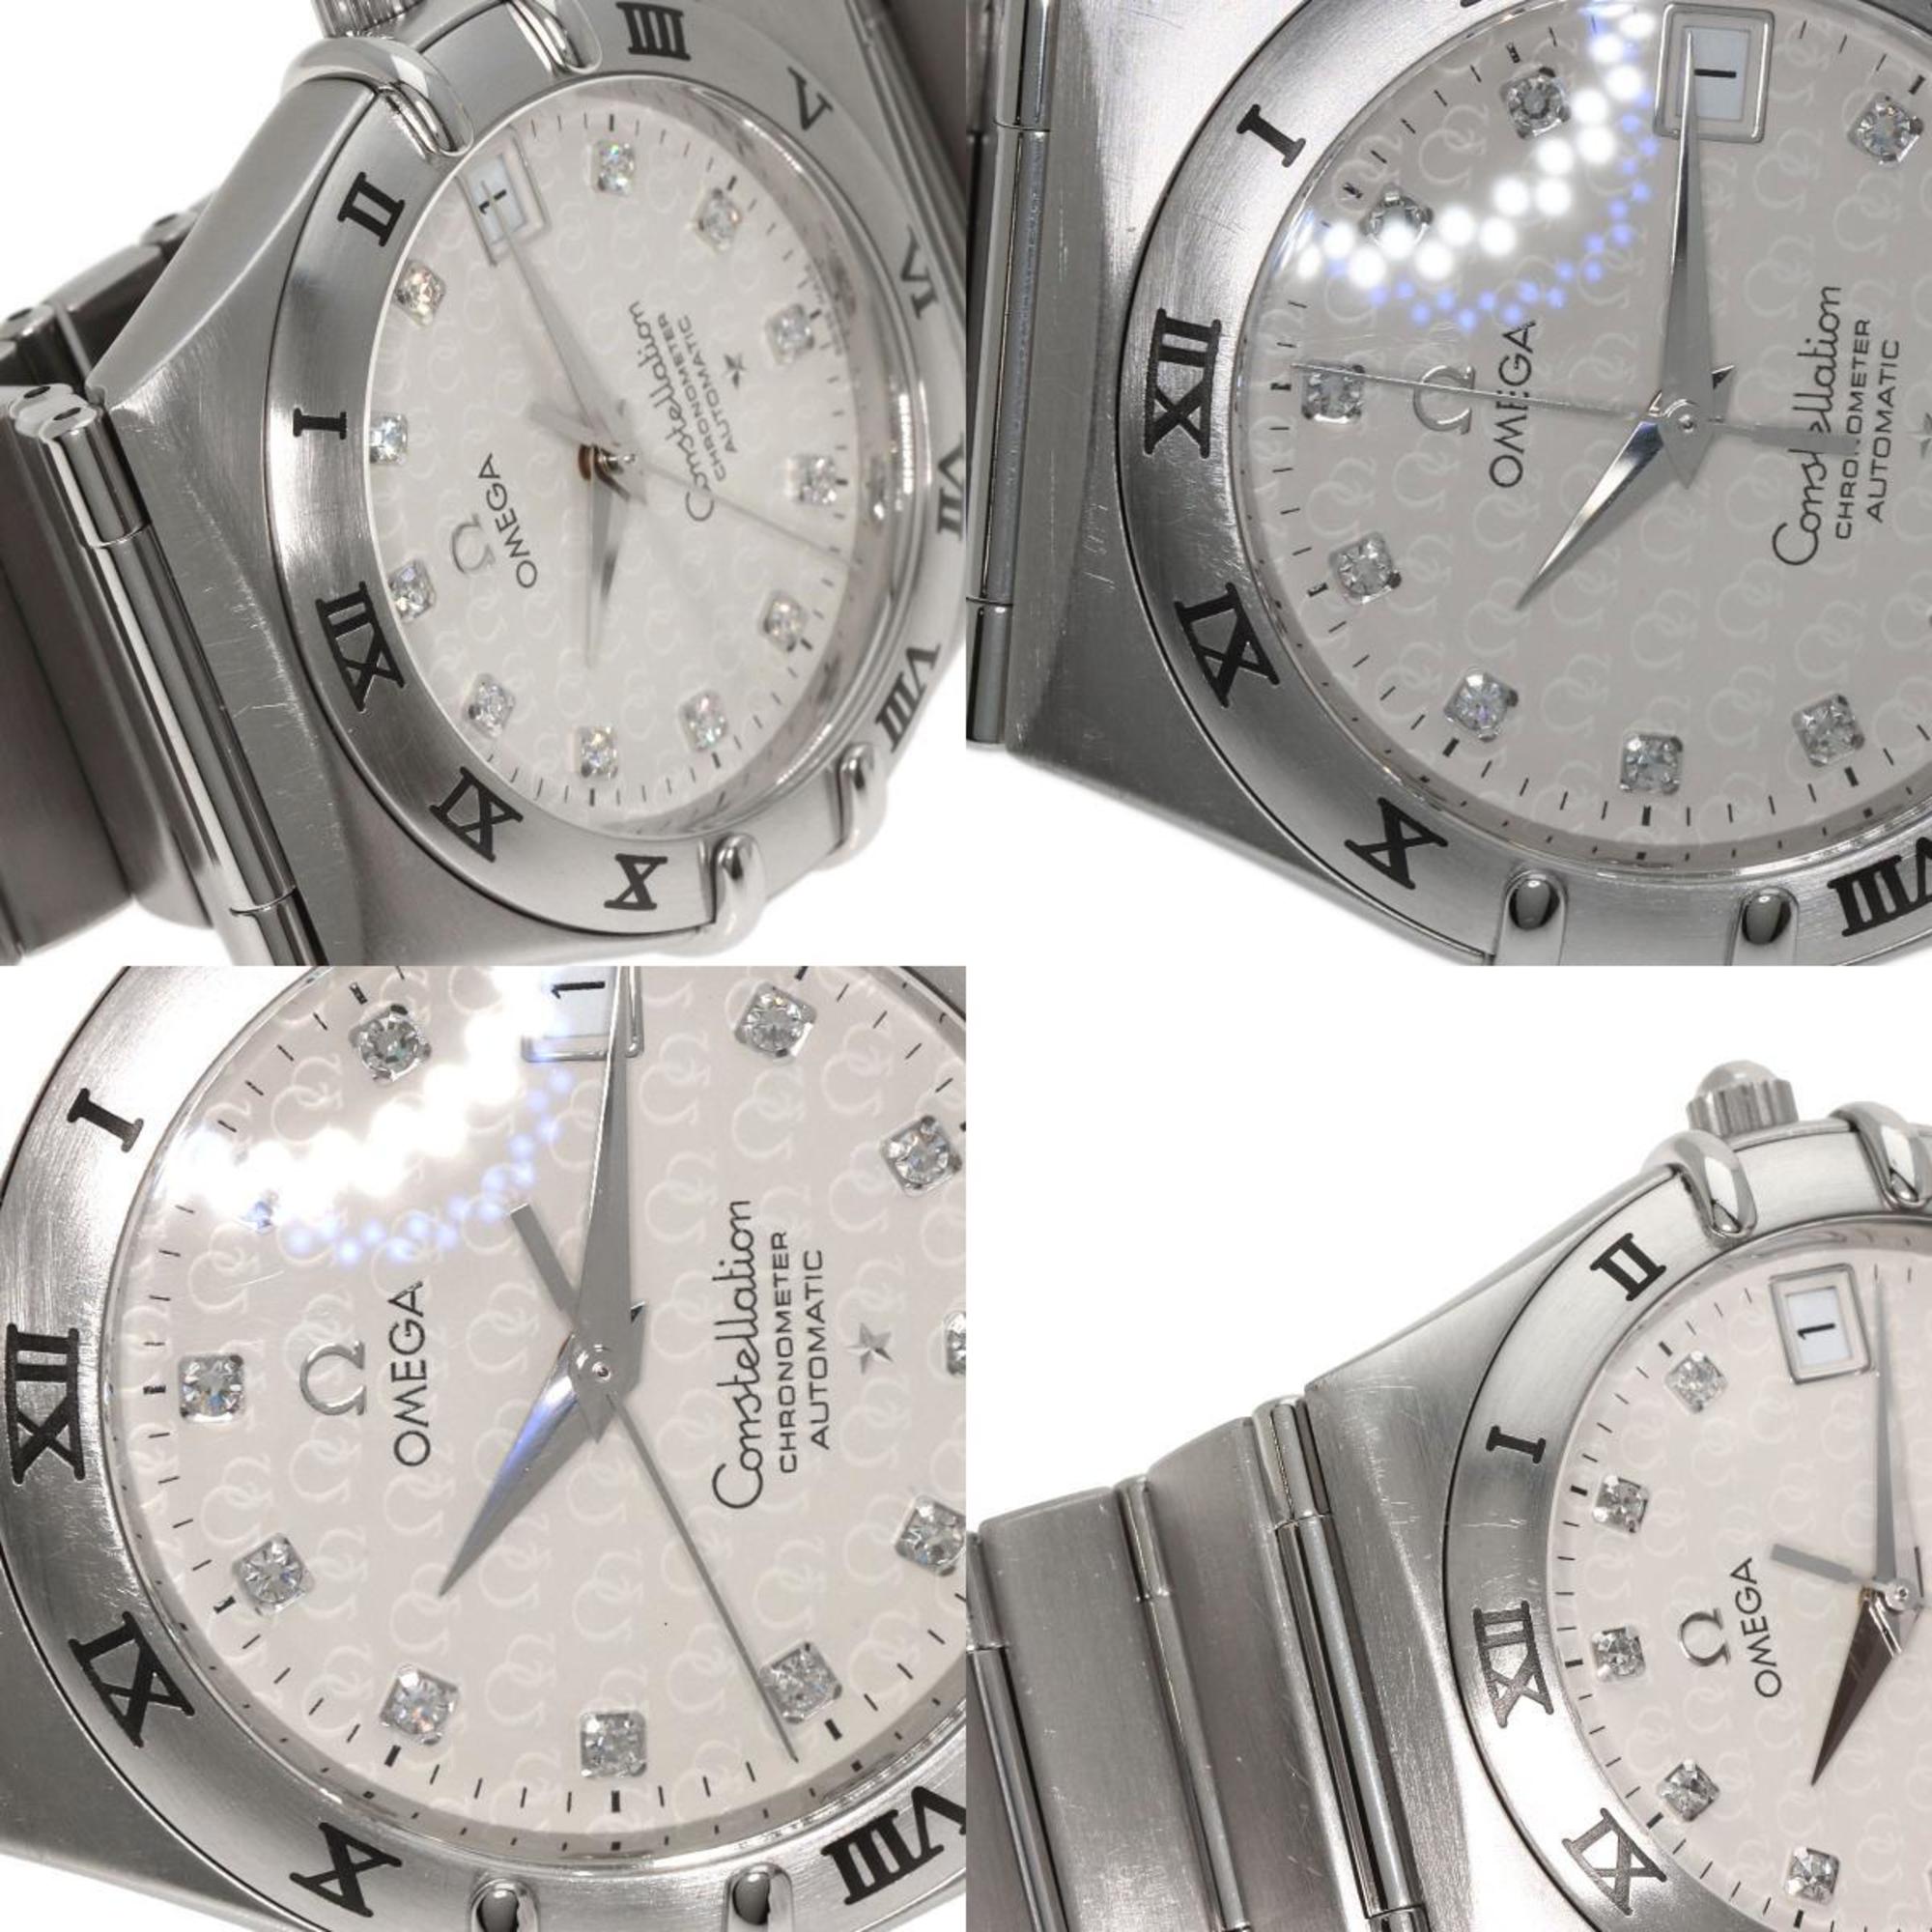 Omega 1504.35 Constellation 50th Anniversary 11P Diamond Watch Stainless Steel SS Men's OMEGA